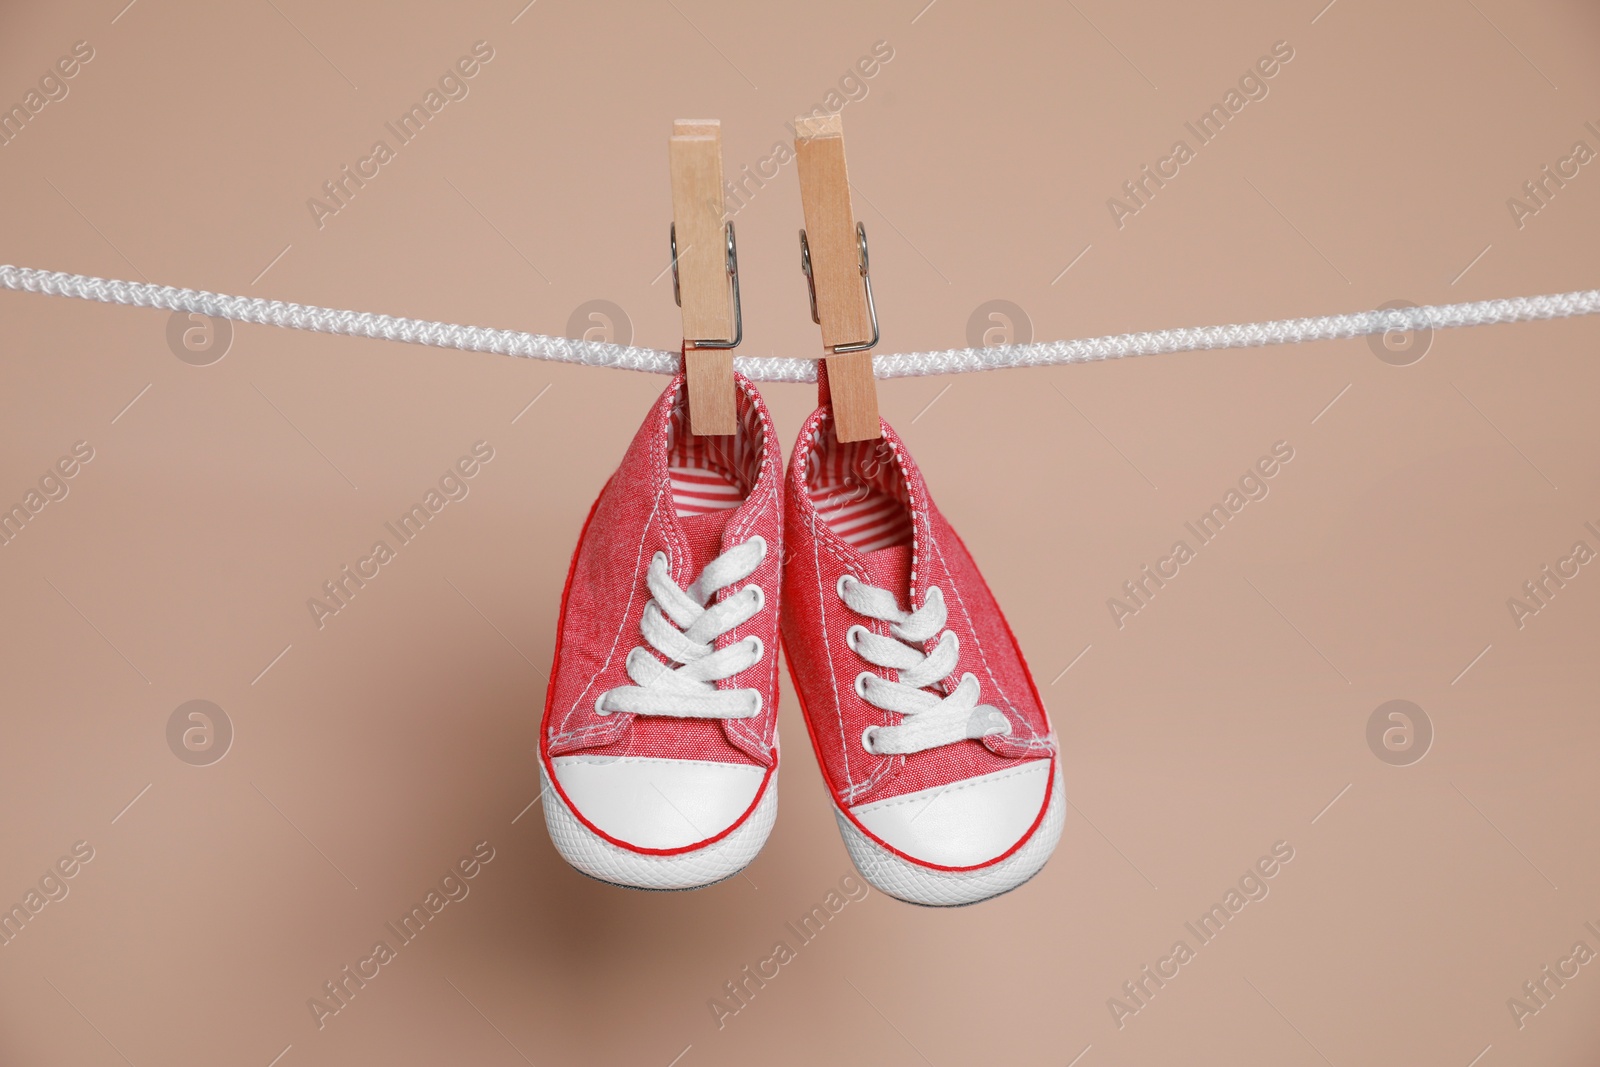 Photo of Cute small baby shoes hanging on washing line against brown background